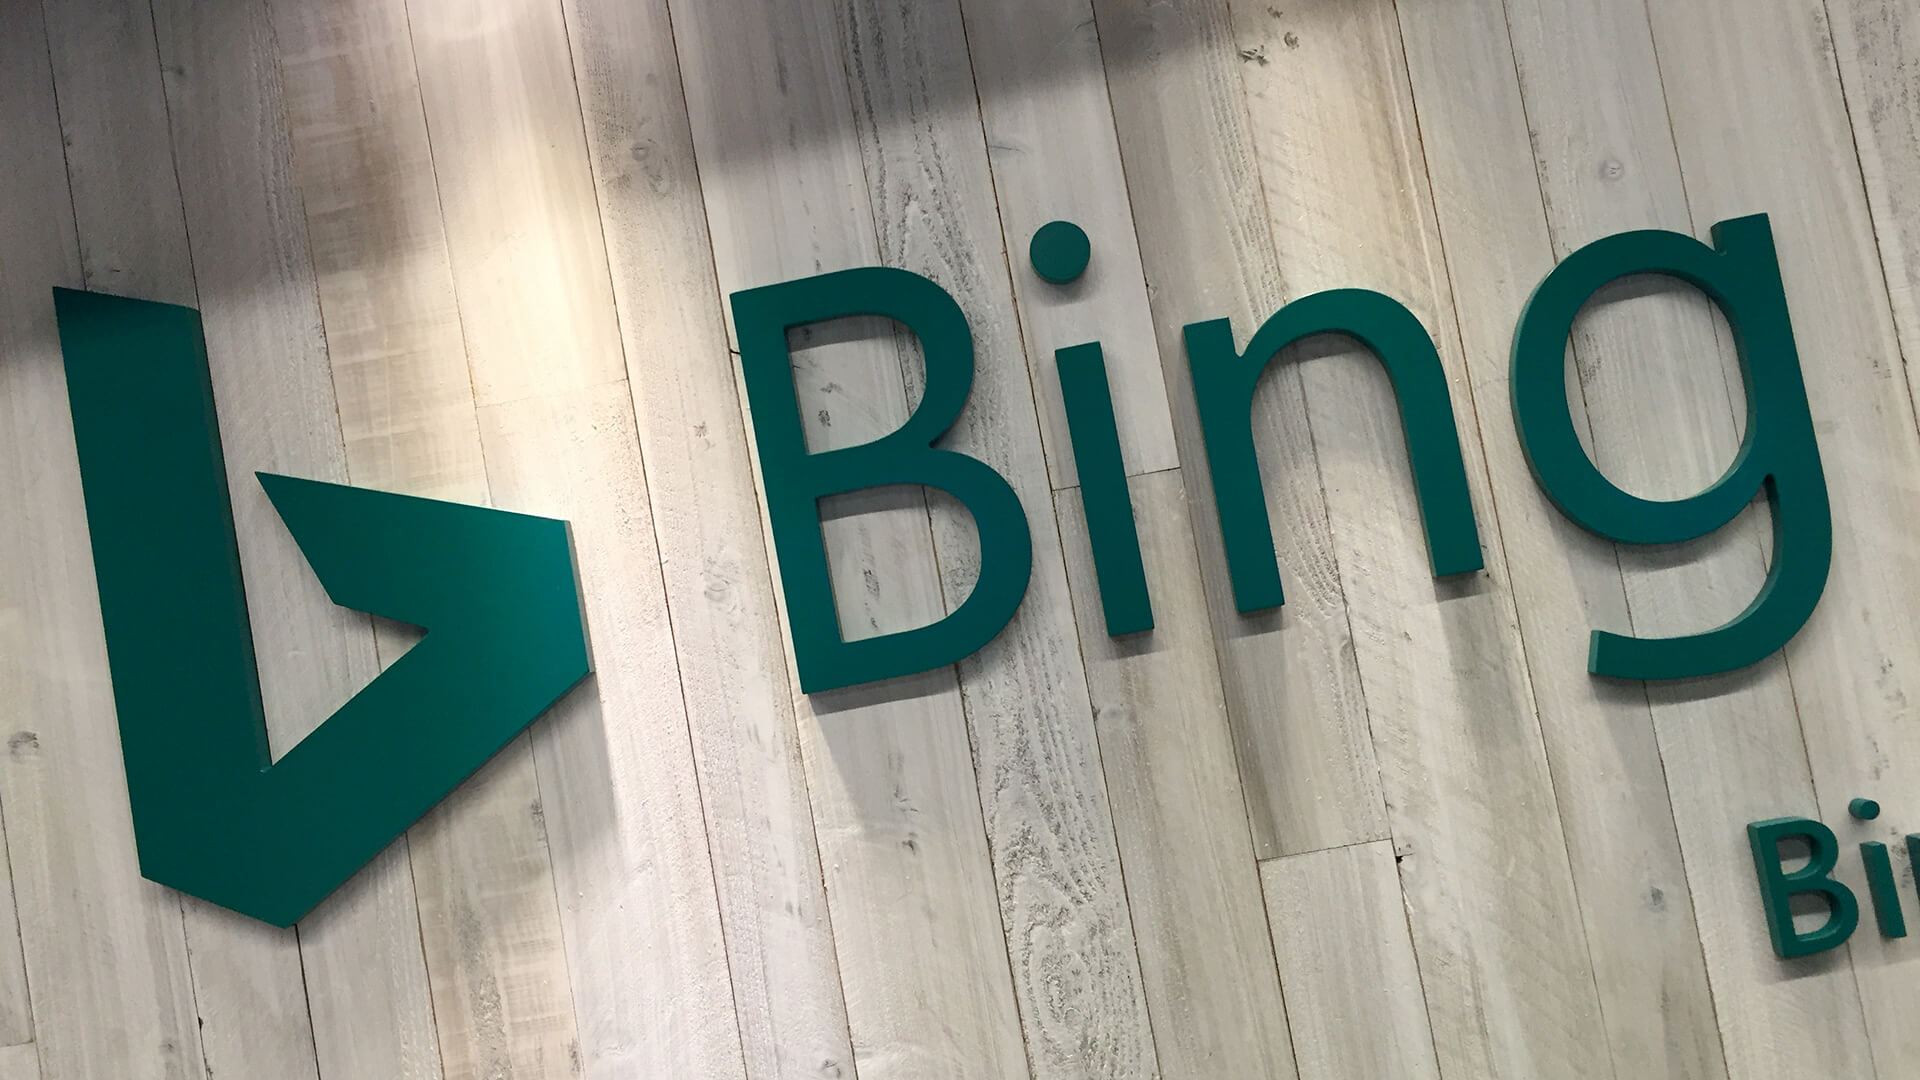 Comment Bing classe les pages - Tactical Solutions